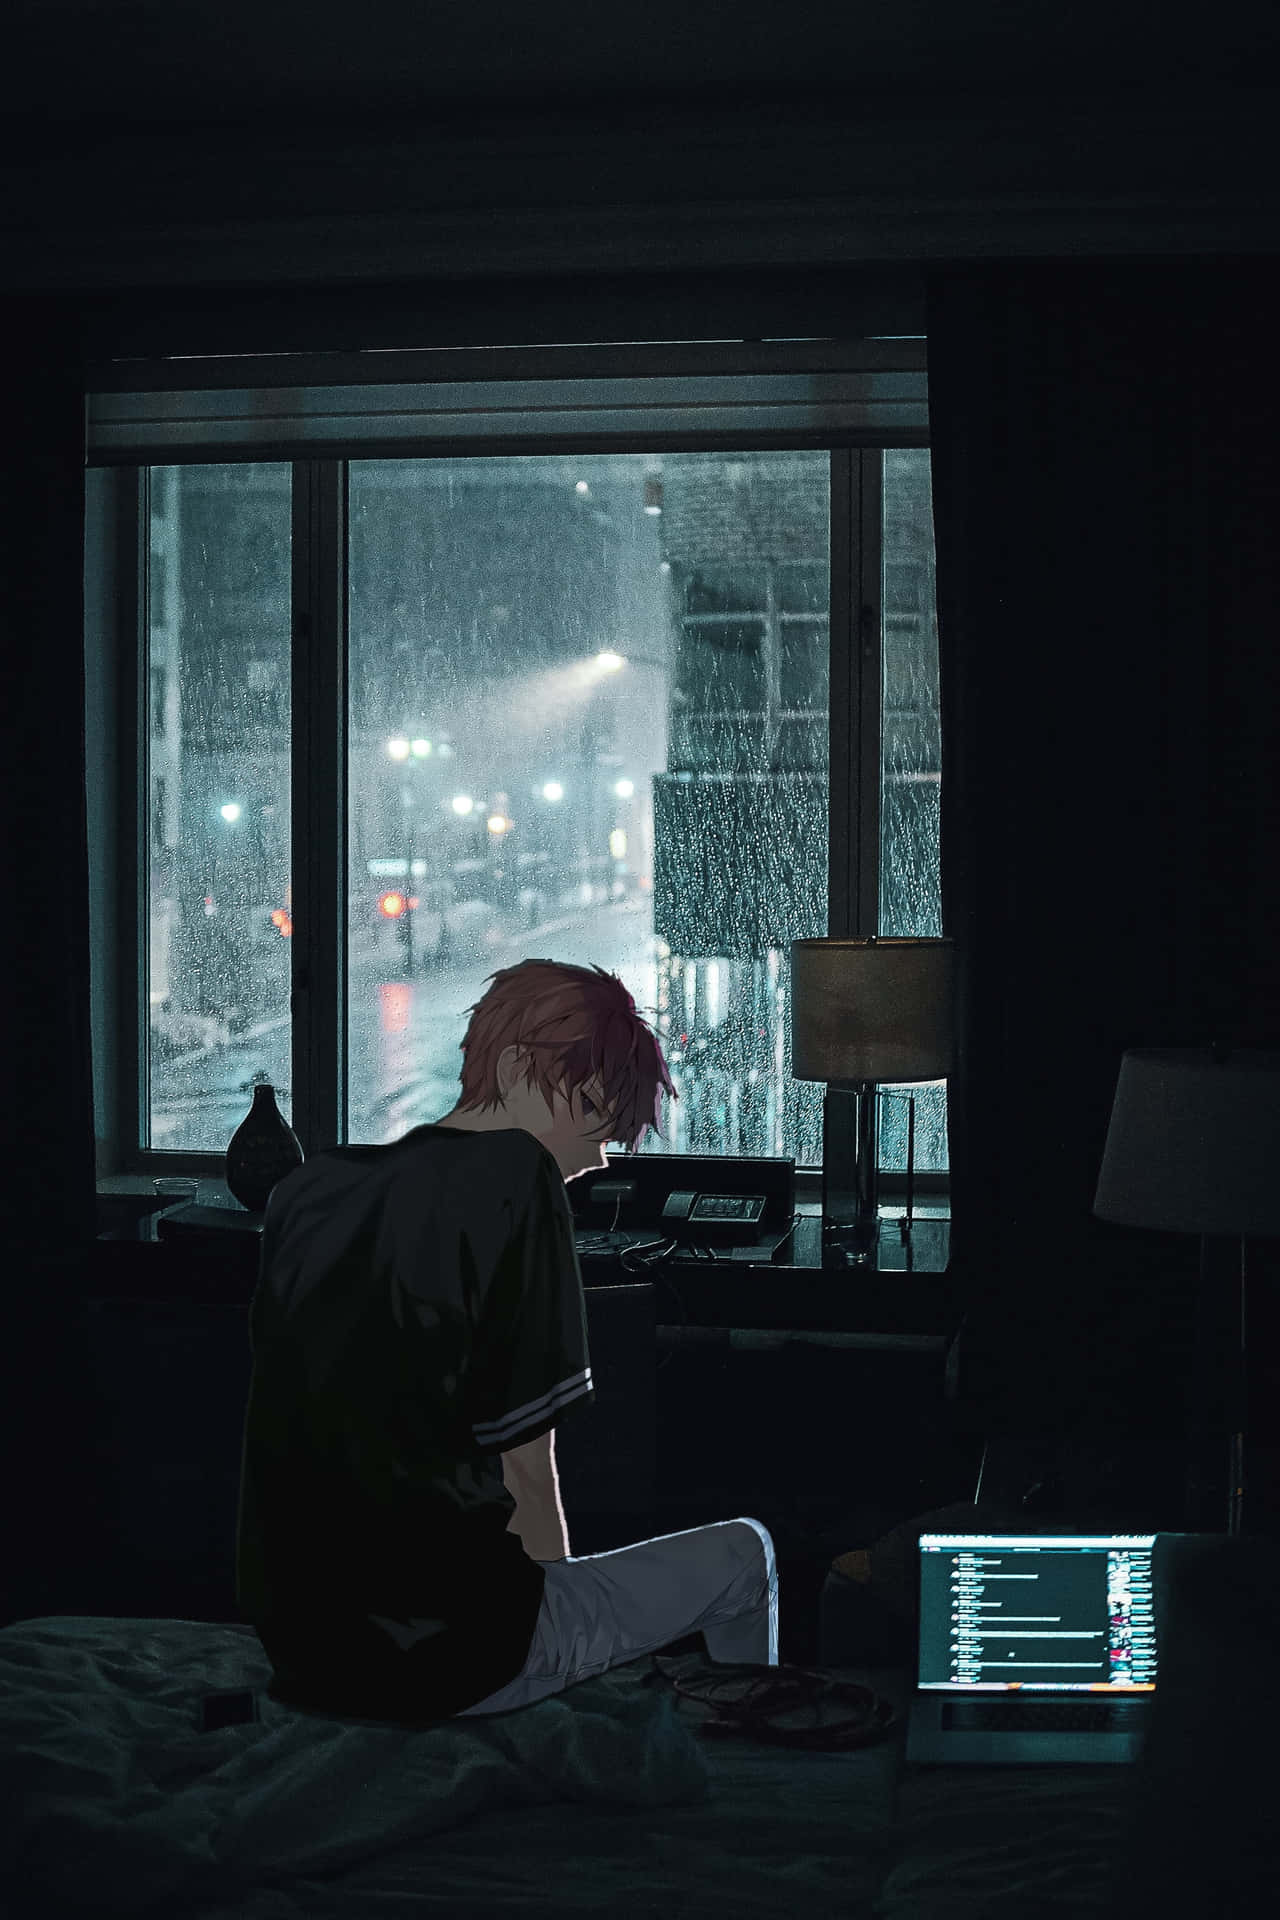 A Stylish Anime Boy Working on His Computer Wallpaper